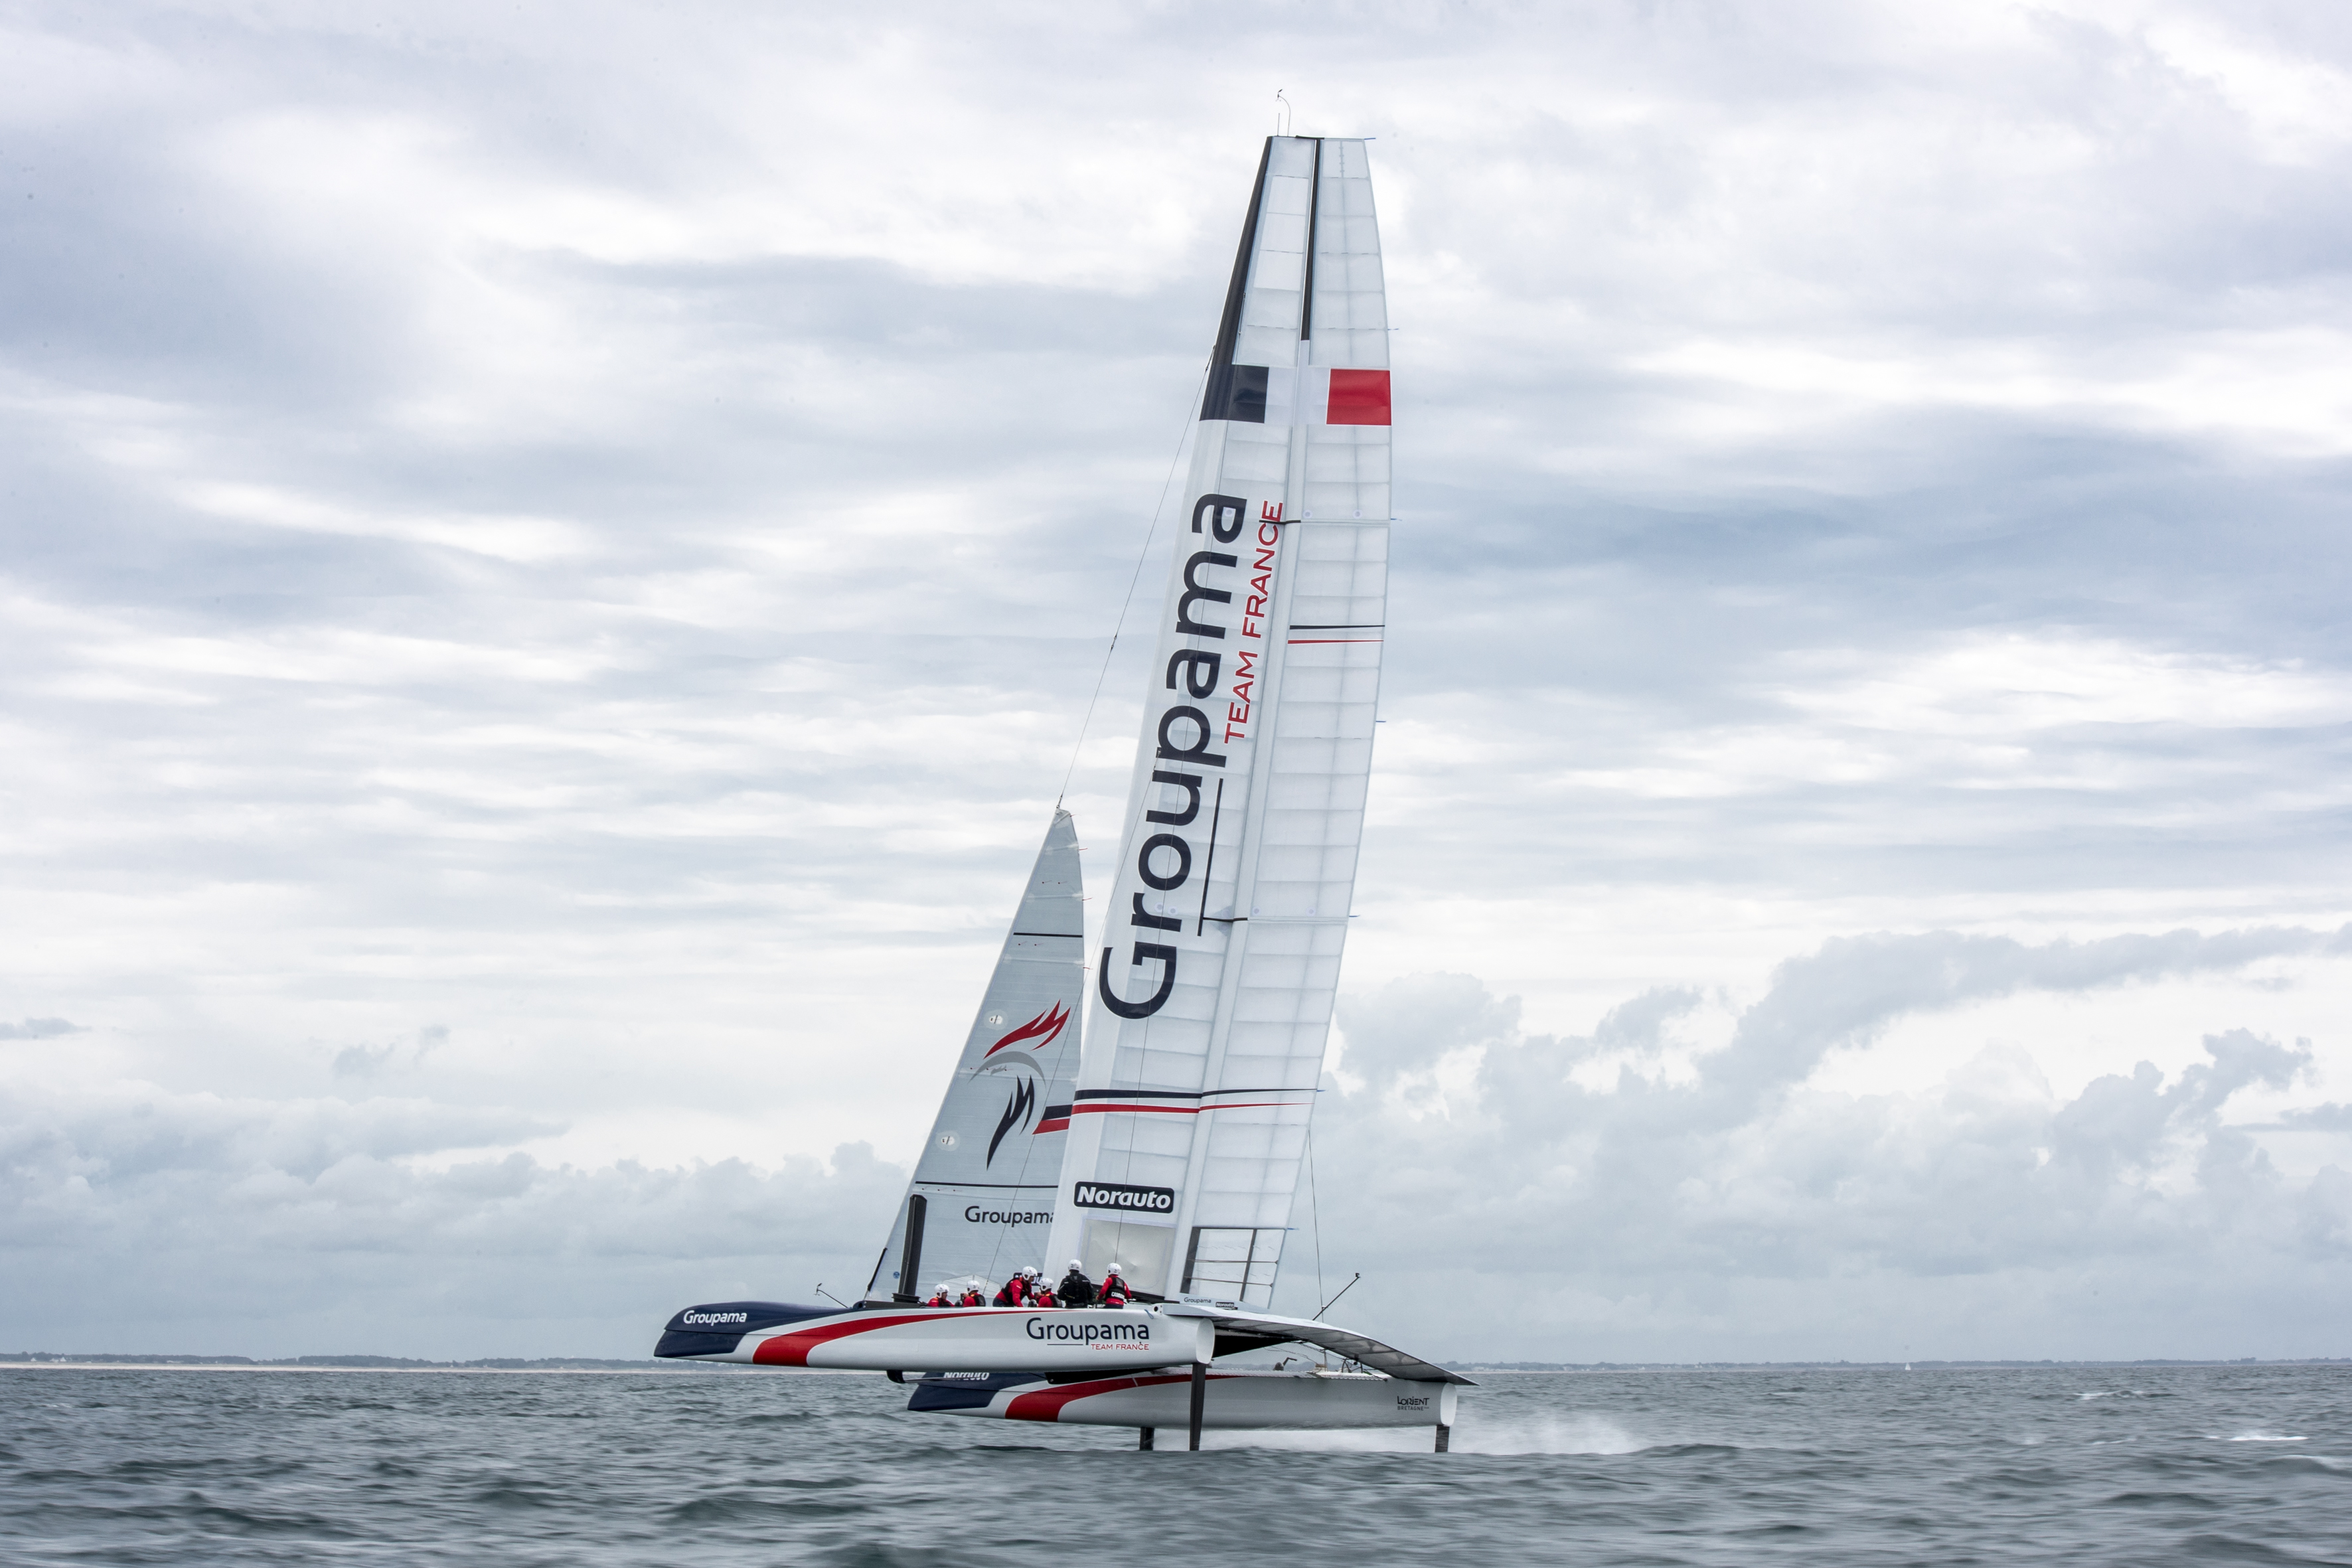 Groupama Team France, which built the boat, plan to sail it in the next round of the Louis Vuitton America’s Cup World Series (LCACWS).